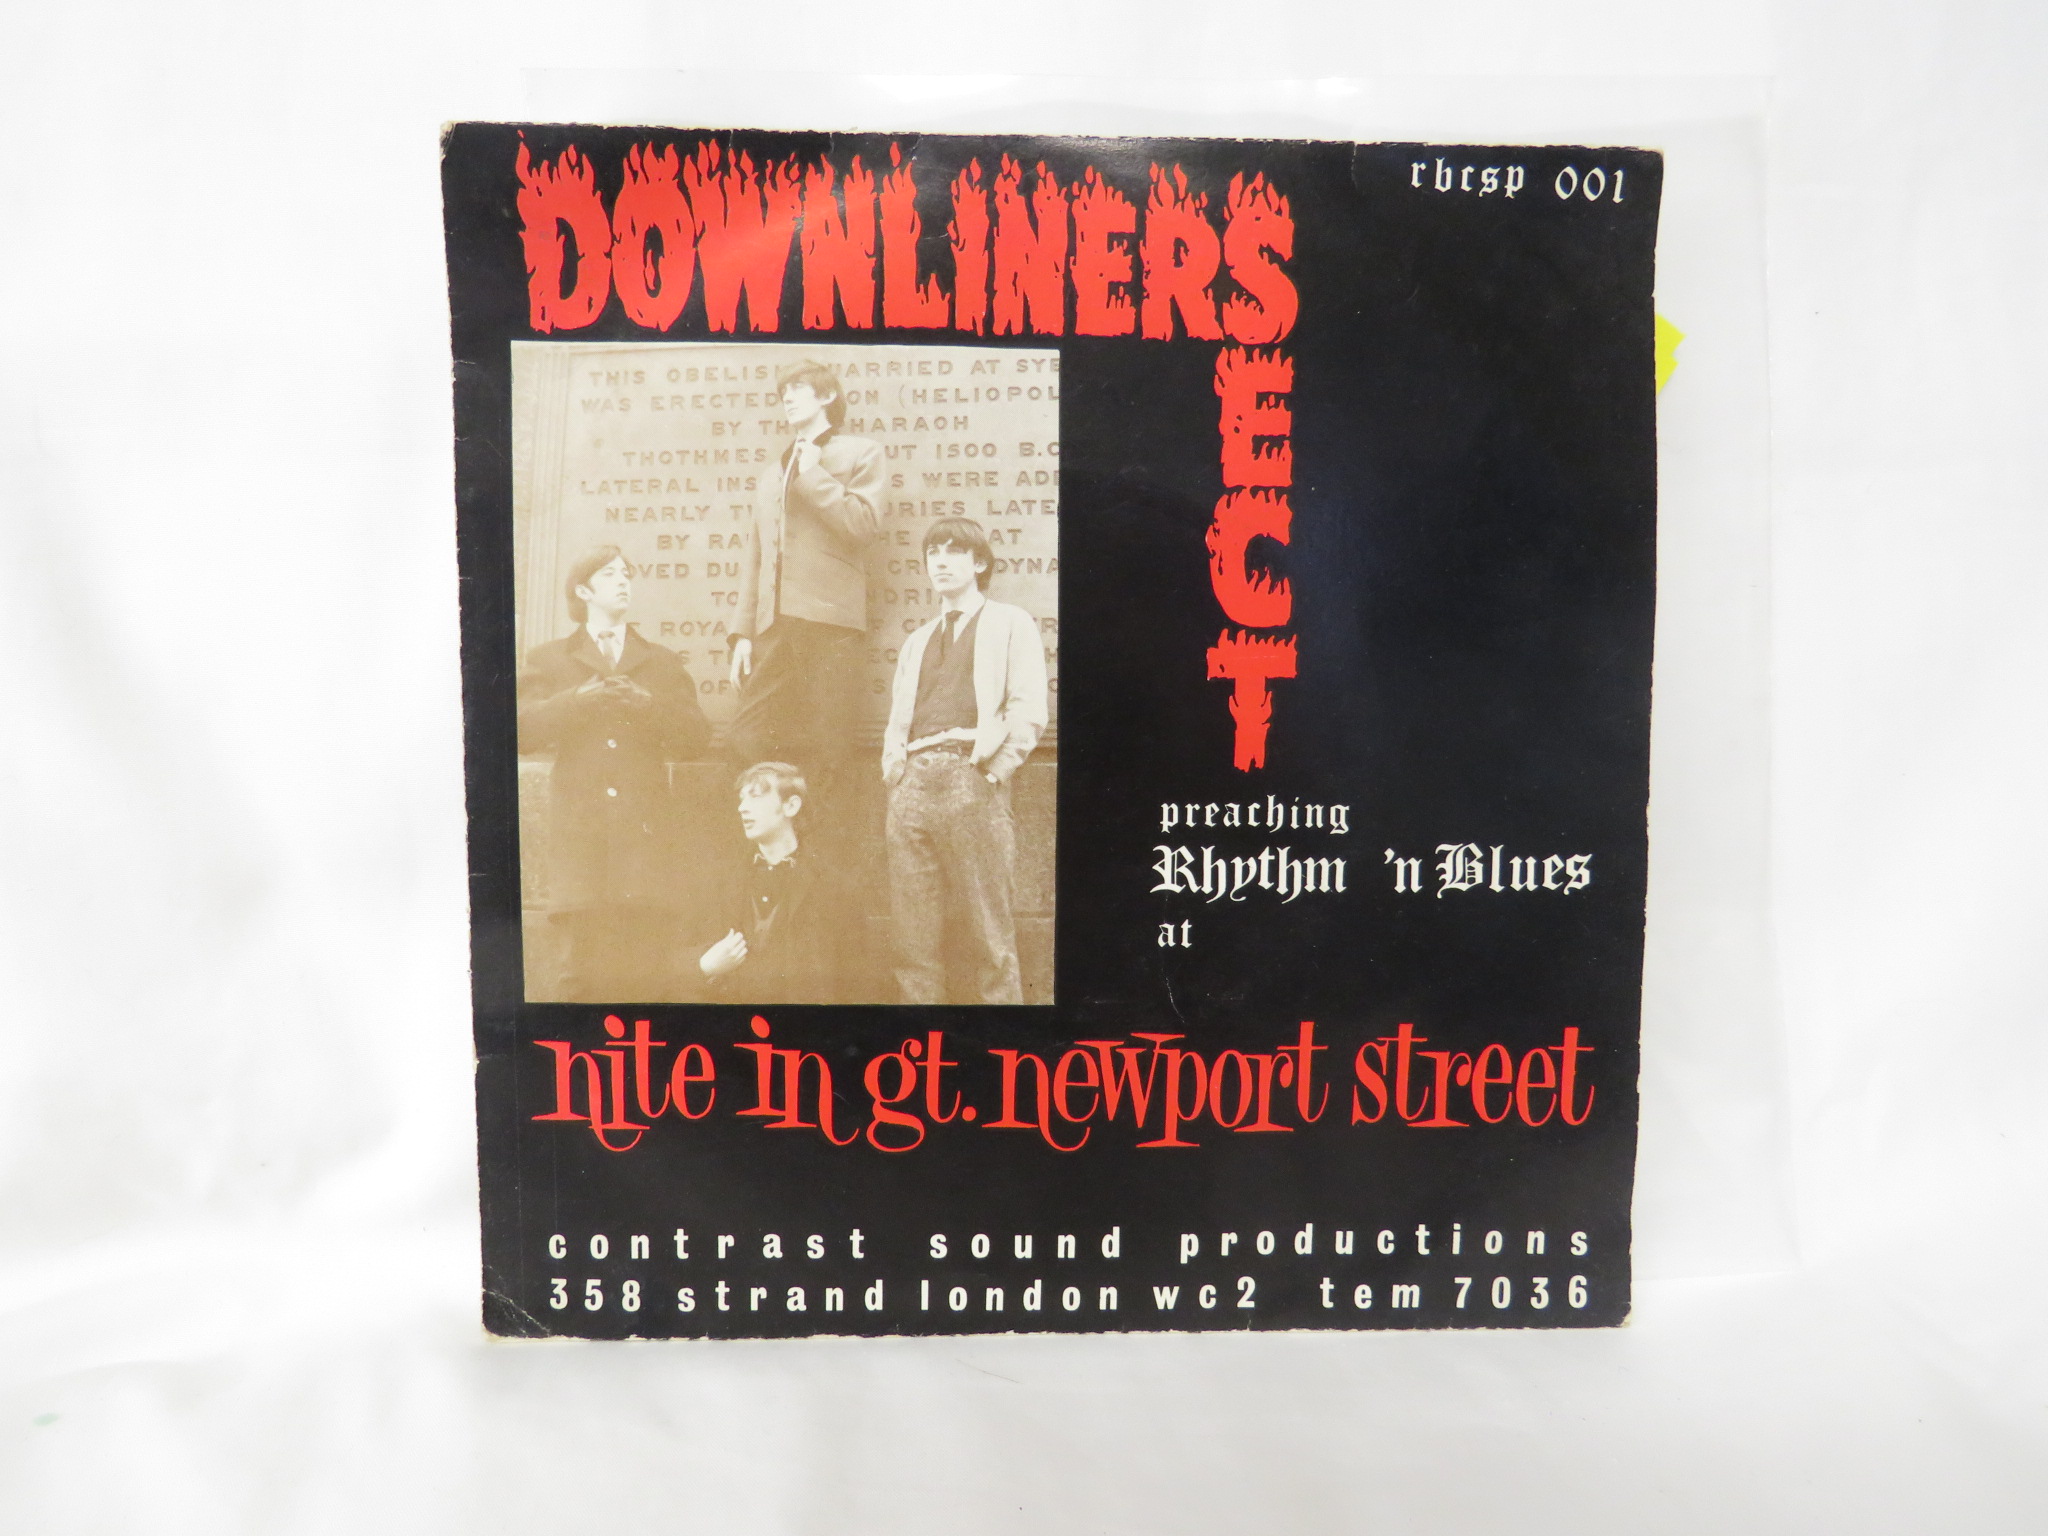 VINYL E.P. - DOWLINERS SECT RBCSP 001 'NITE IN GT. NEWPORT STREET'